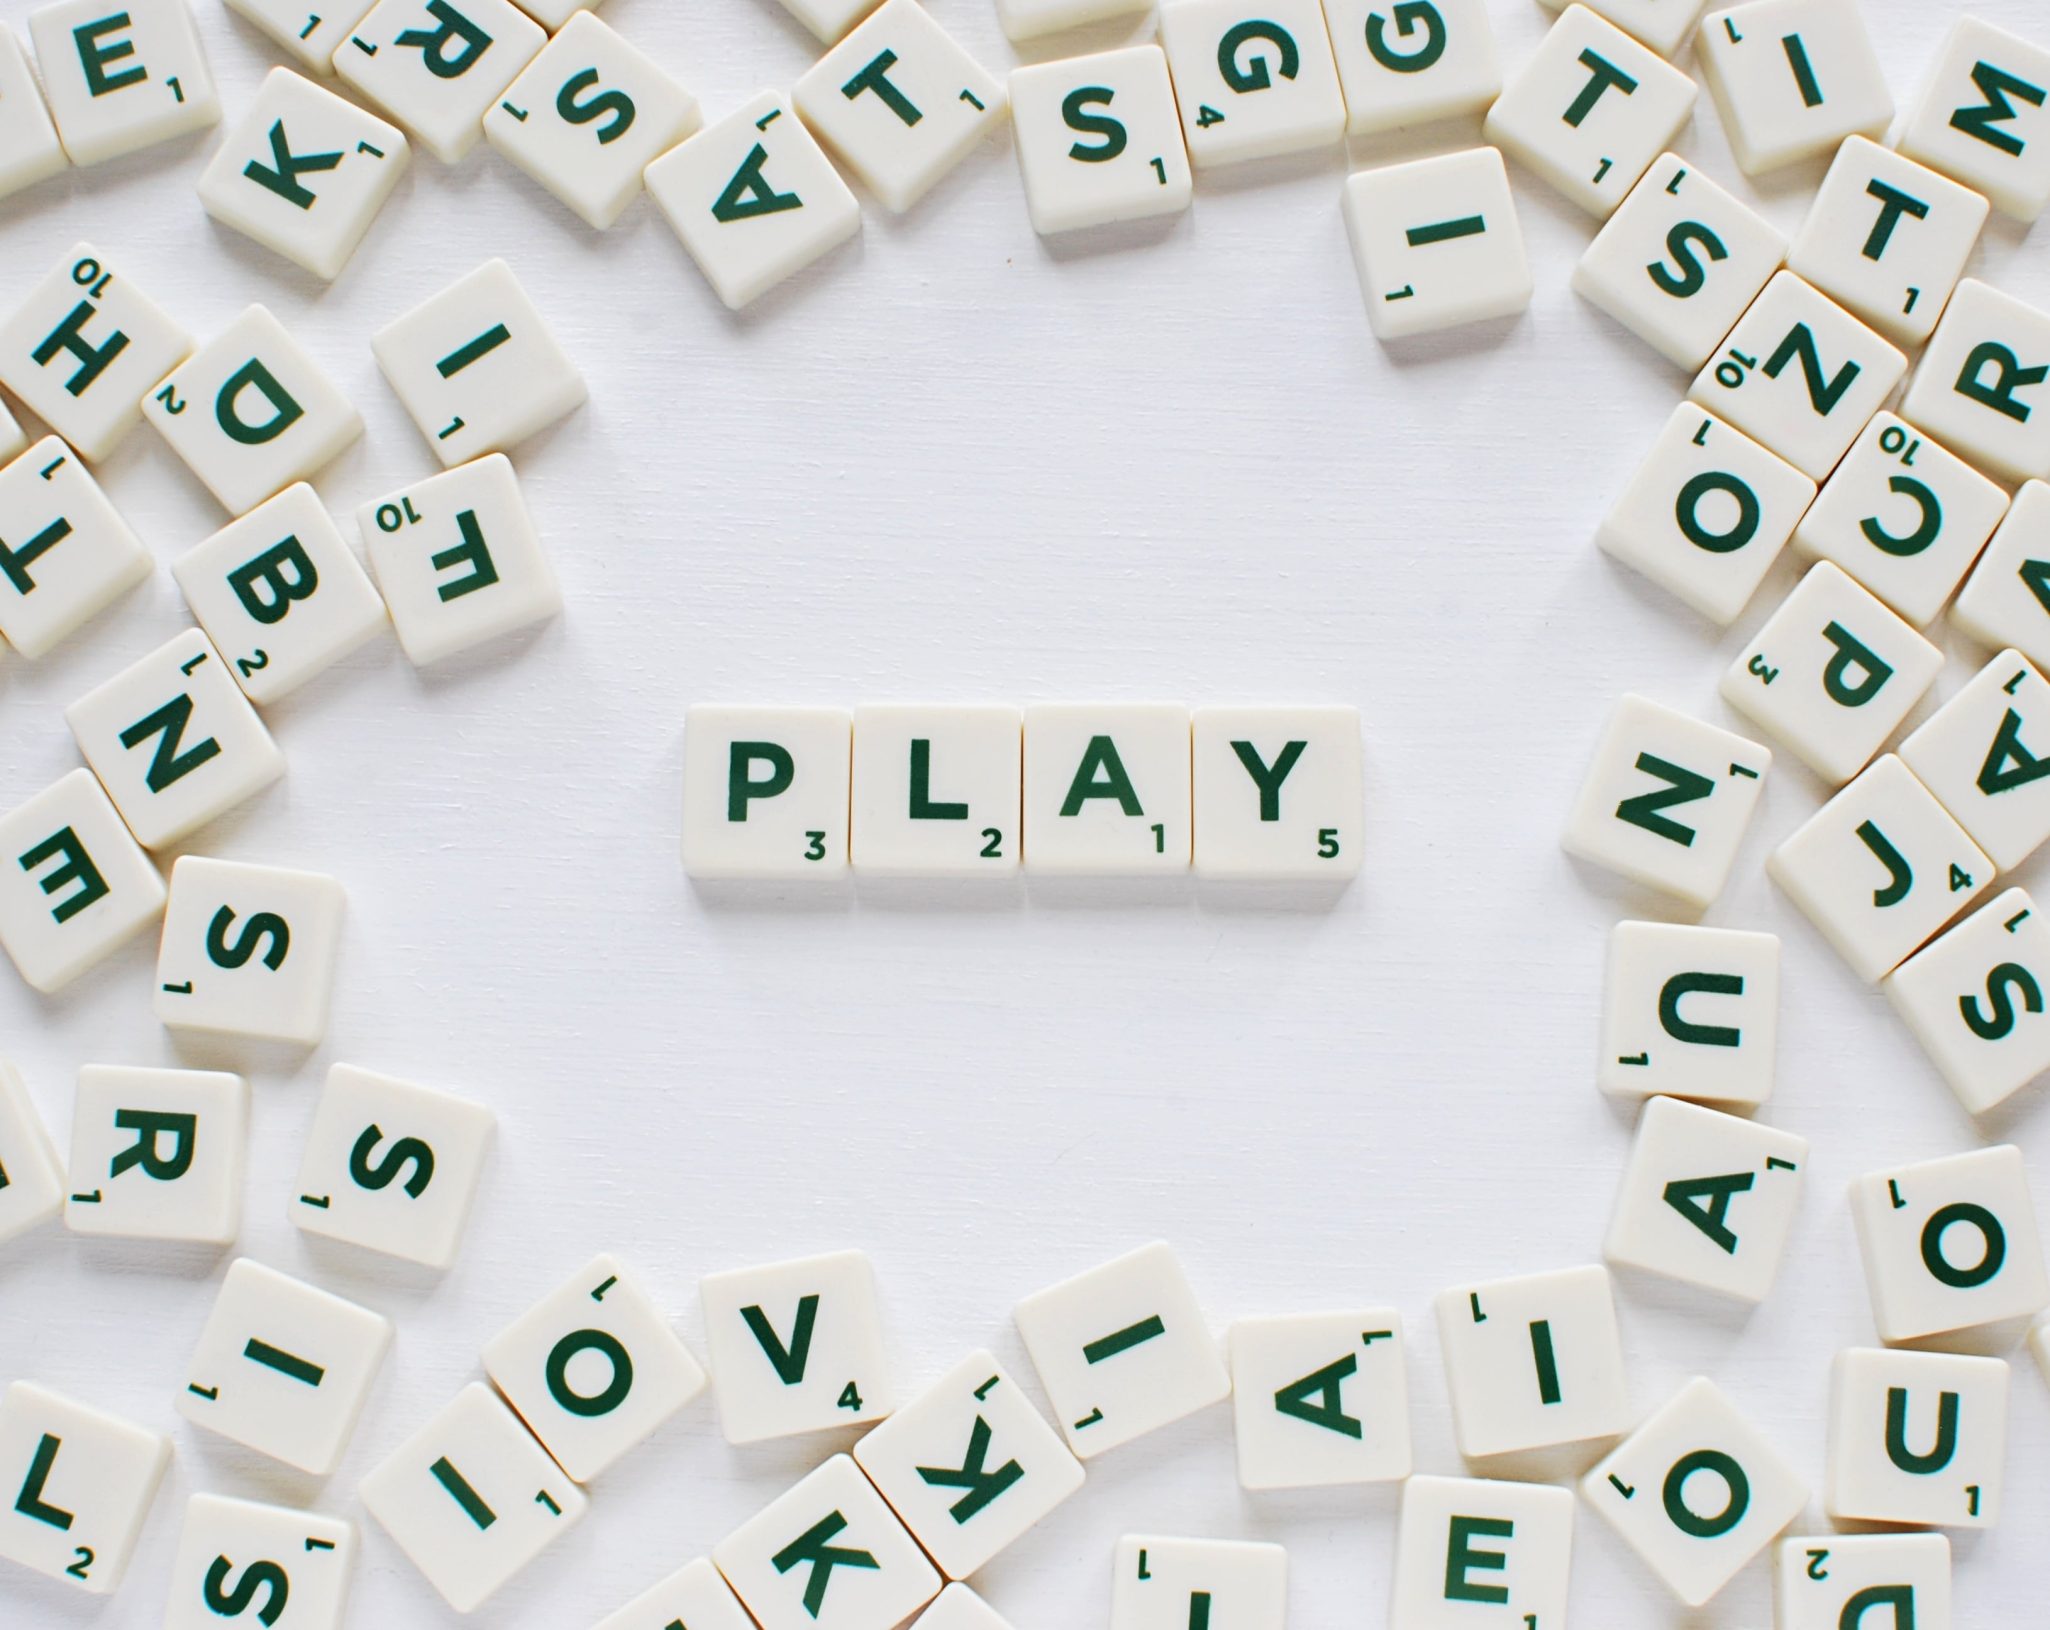 Scrabble pieces all over white table spelling out PLAY